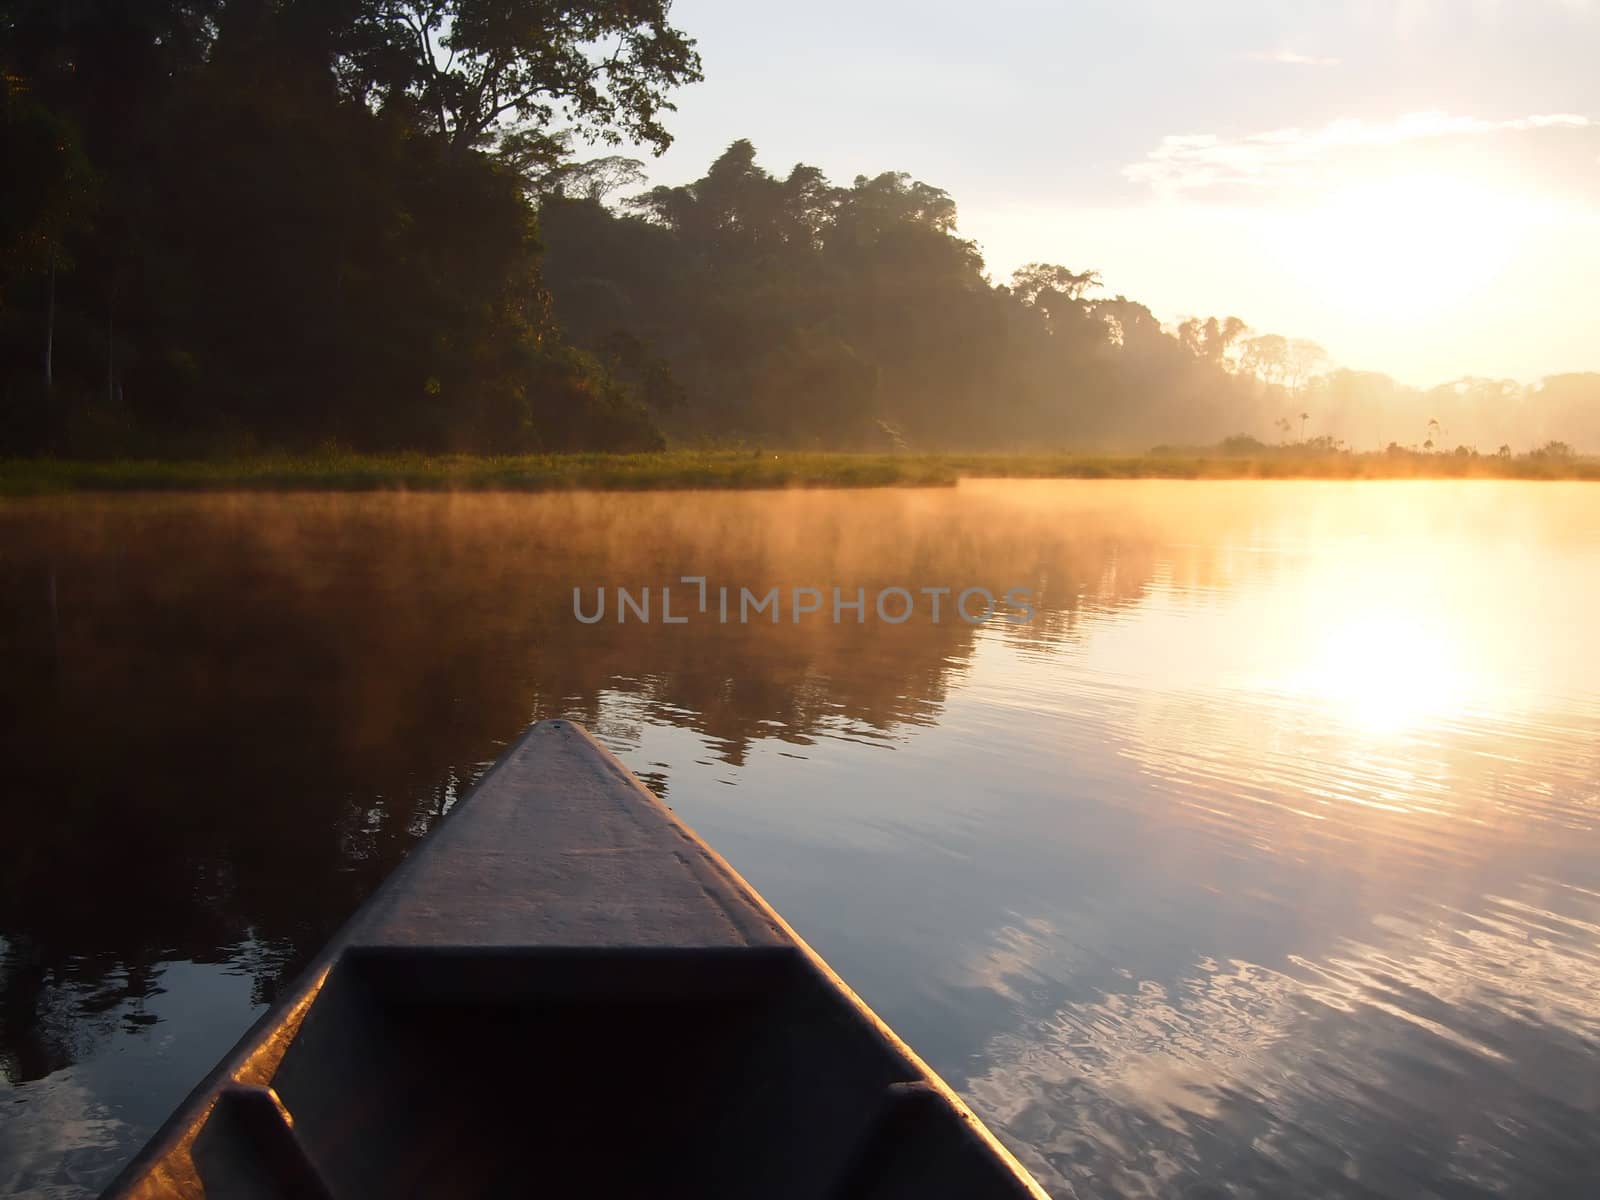 Navigating the Tambopata river by boat during sunrise in the Amazon rainforest in Peru.